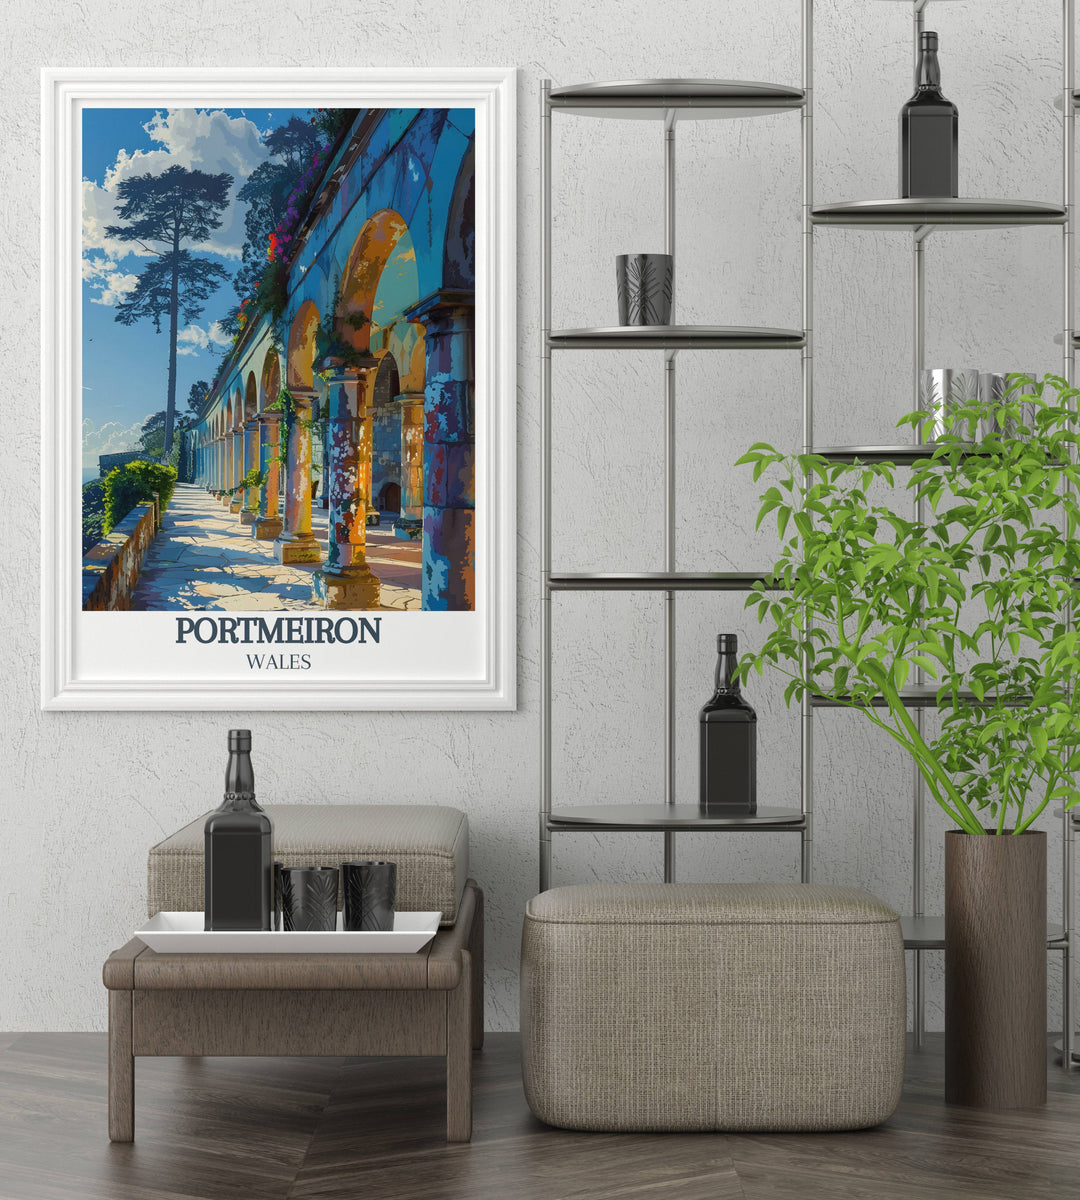 Immerse yourself in the allure of Portmeirion with our stunning Fine Art Prints. Each print captures the essence of Wales, from the quaint cottages to the majestic landscapes.